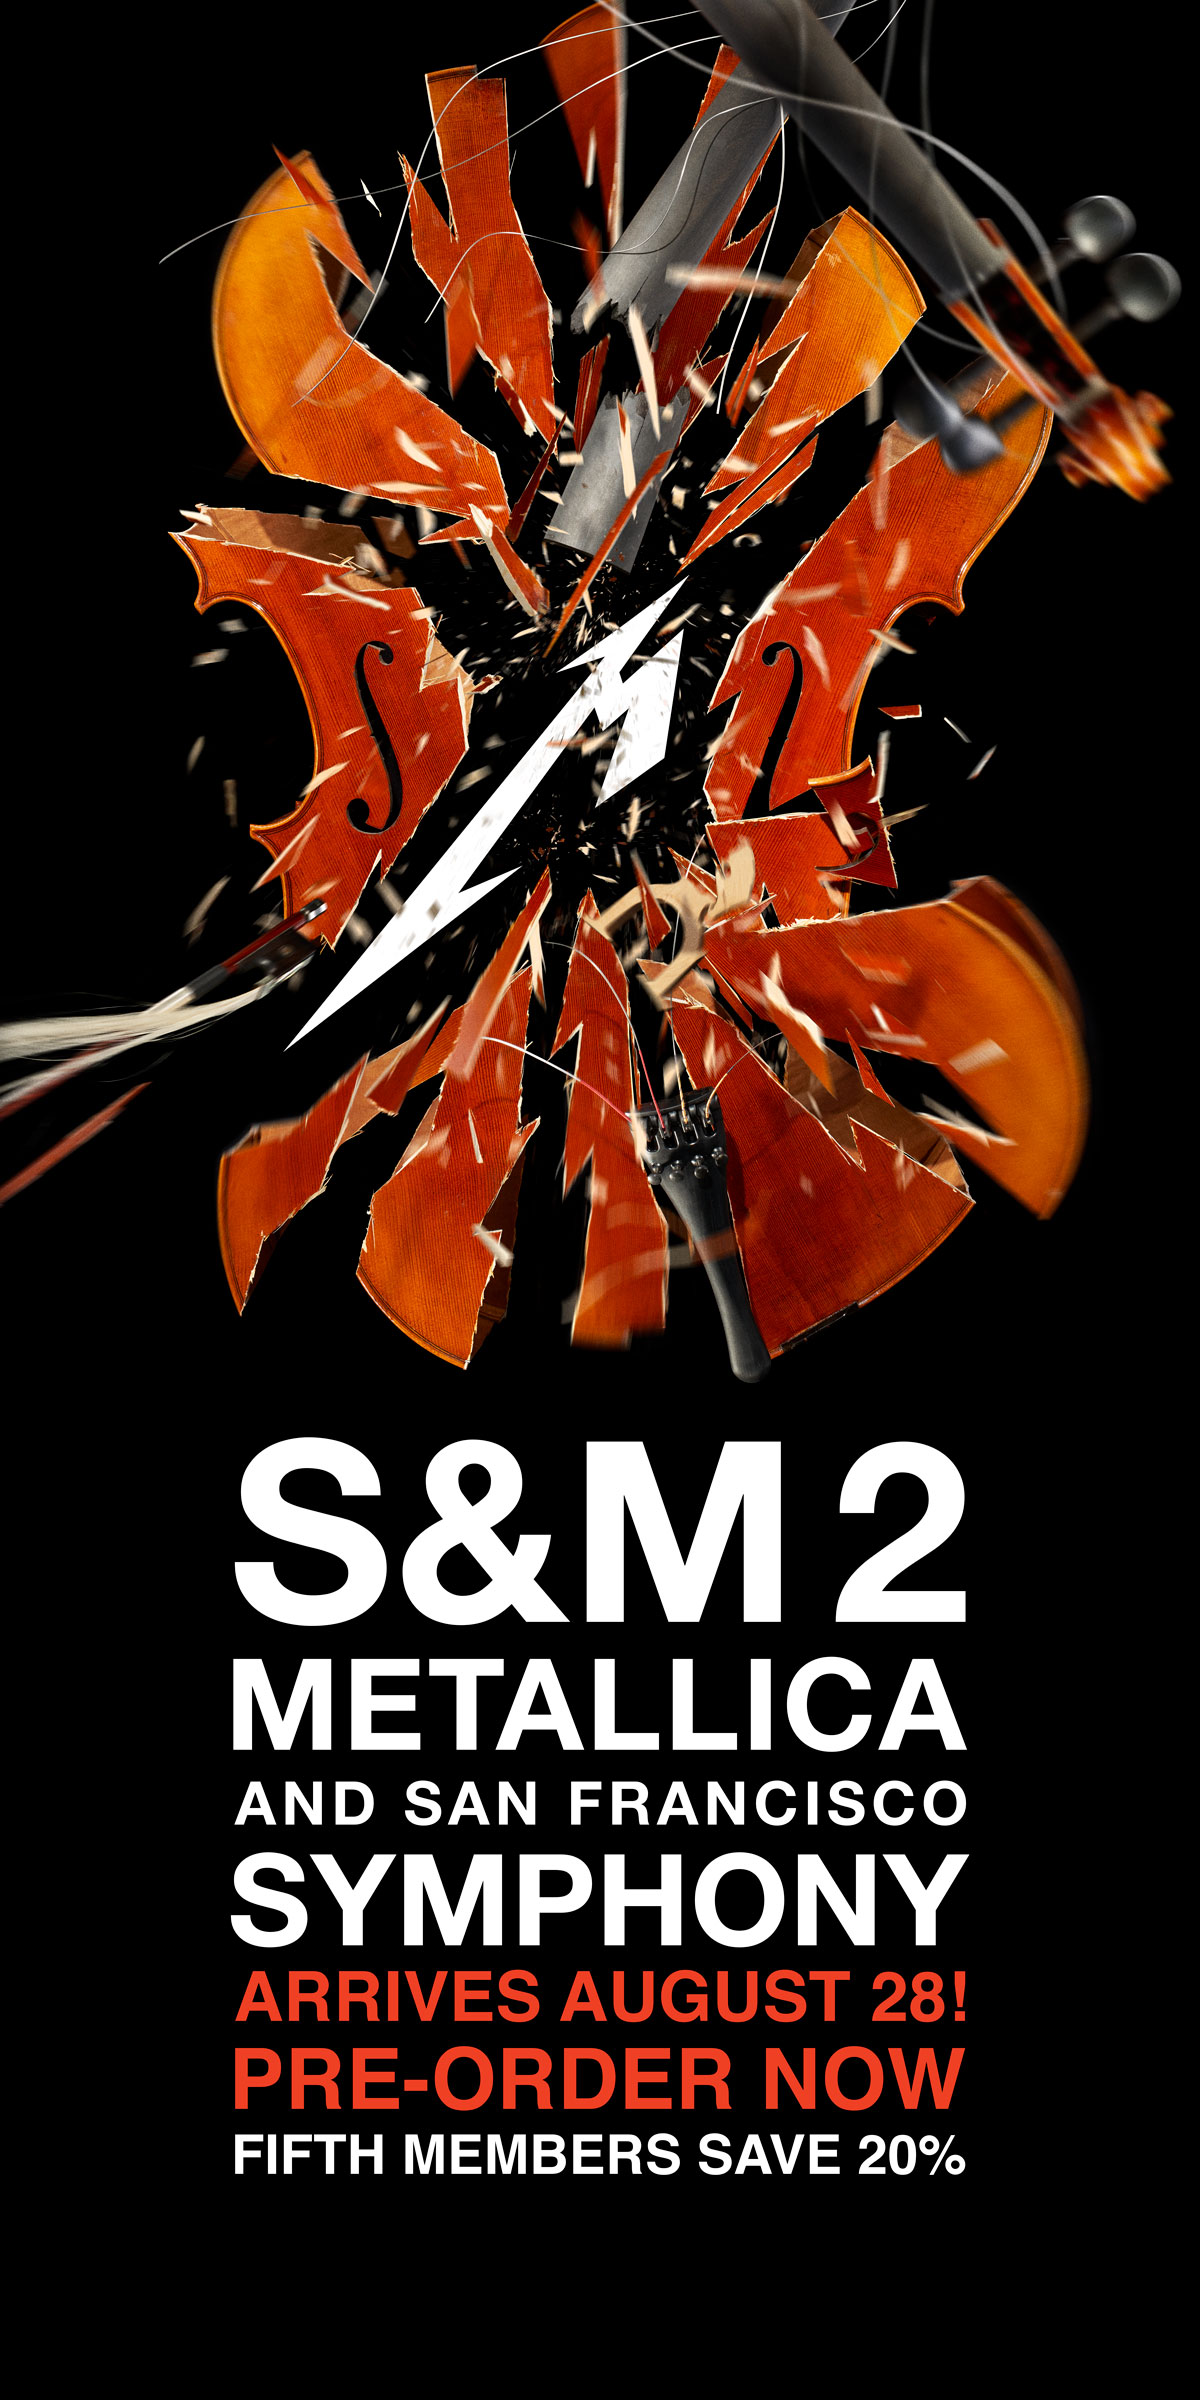 S&M2 Finally Arrives on August 28!